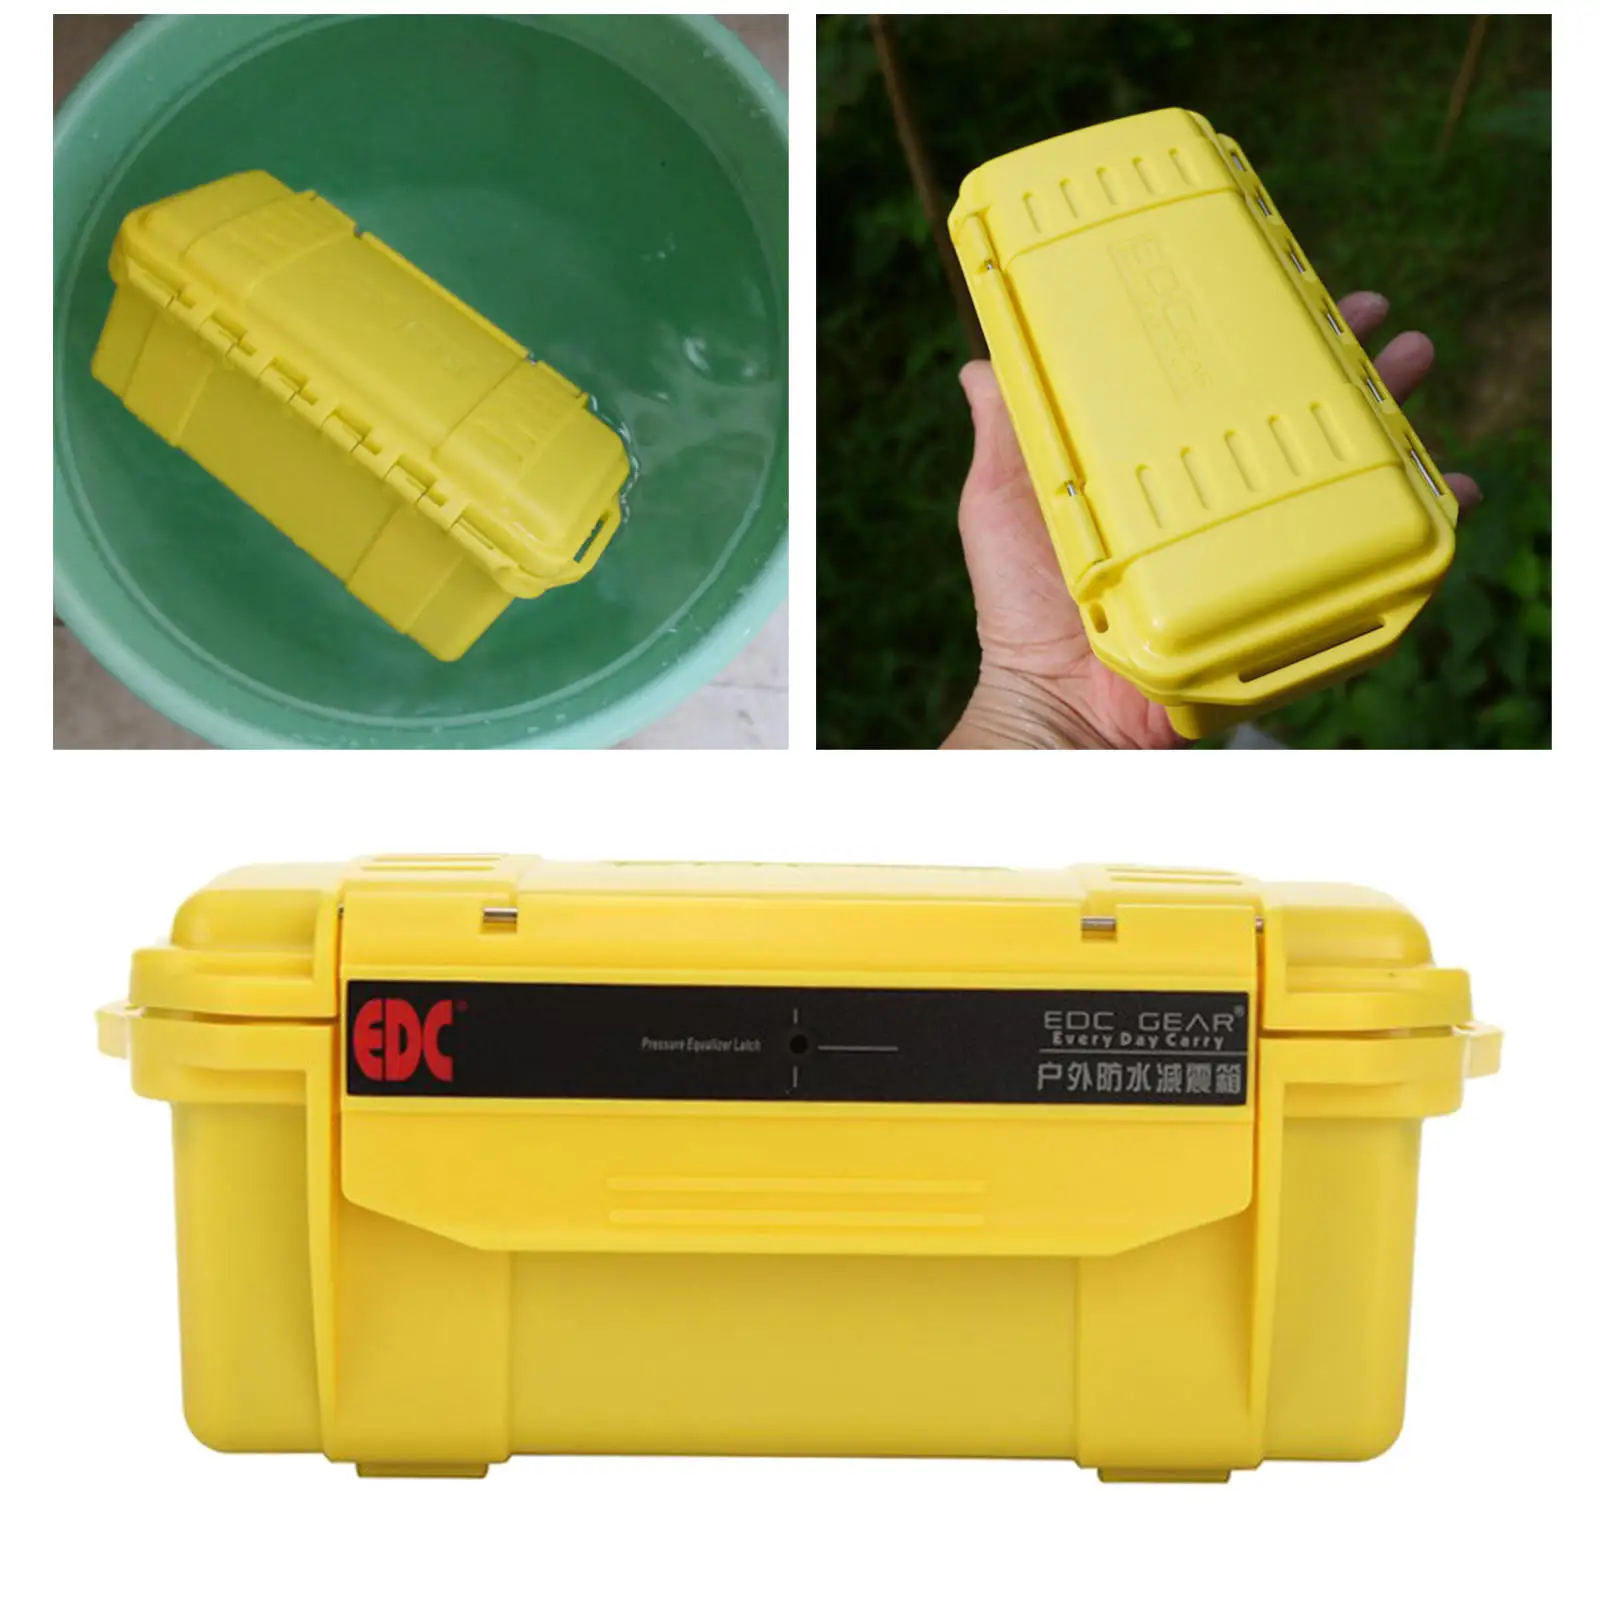 Outdoor Shockproof Waterproof Boxes Survival Airtight Case Holder Storage Tools Travel Sealed Containers 4 Colors